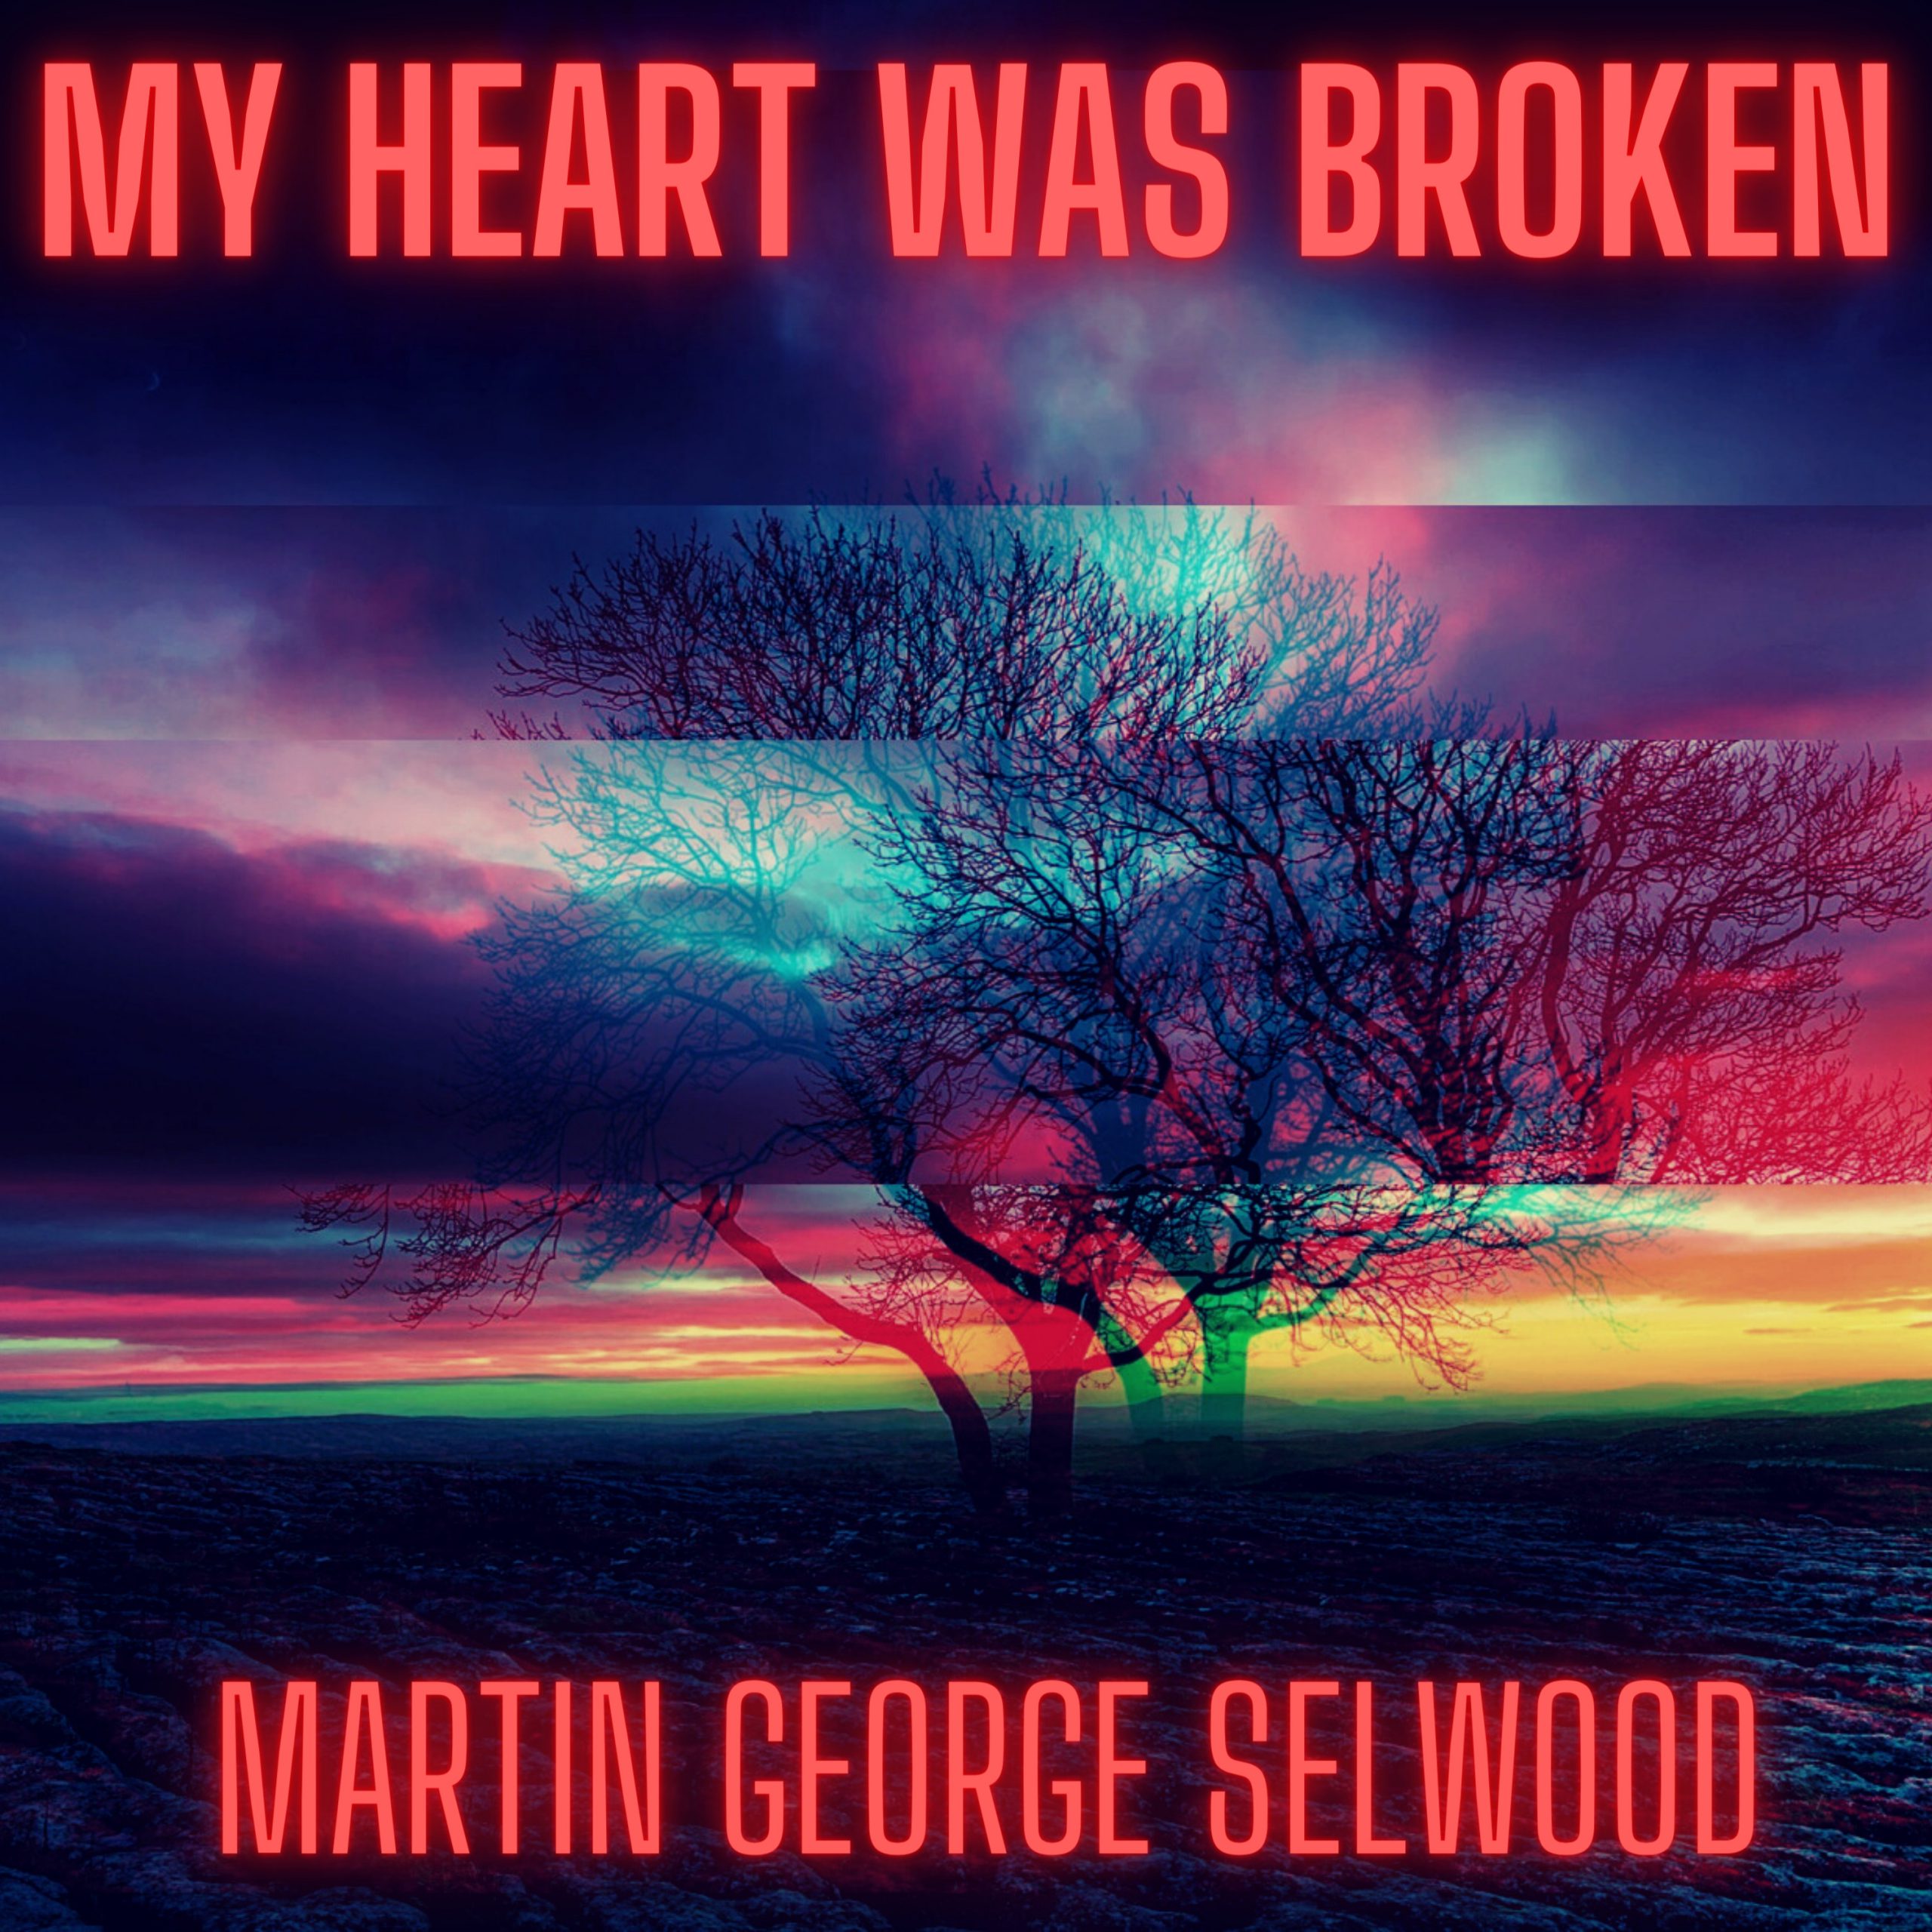 My Heart Was Broken album cover by Martin George Selwood